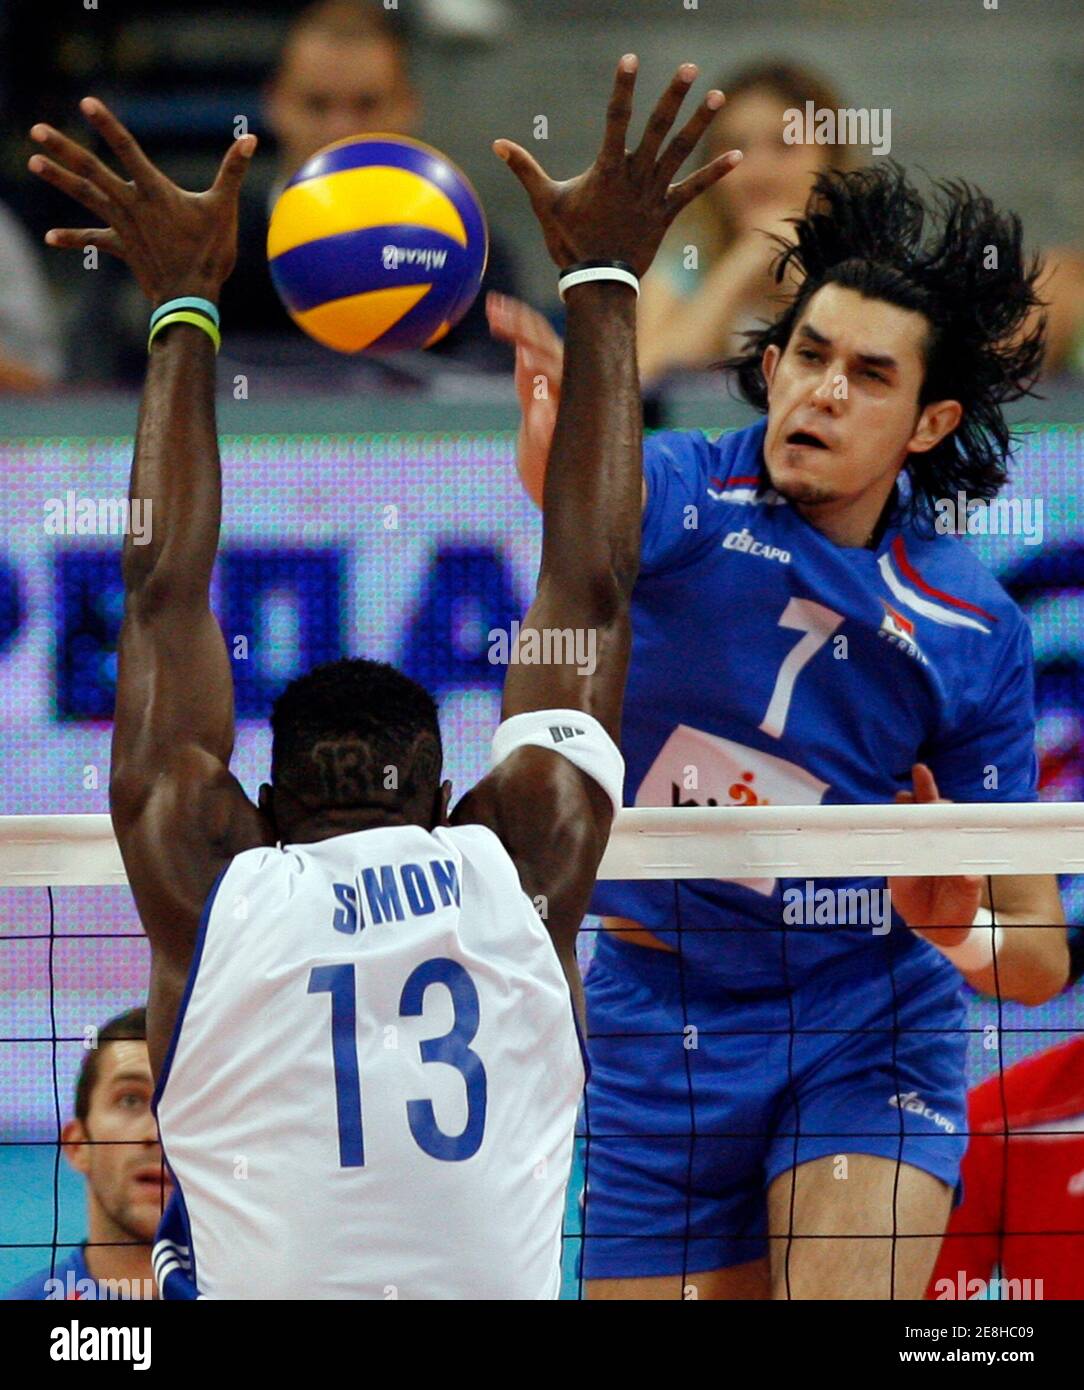 Serbia's Dragan Stankovic (R) spikes the ball against Cuba's Aties Roberlandy Simon during their men's World League 2009 final round volleyball match in Belgrade July 25, 2009.  REUTERS/Ivan Milutinovic (SERBIA SPORT VOLLEYBALL) Stock Photo